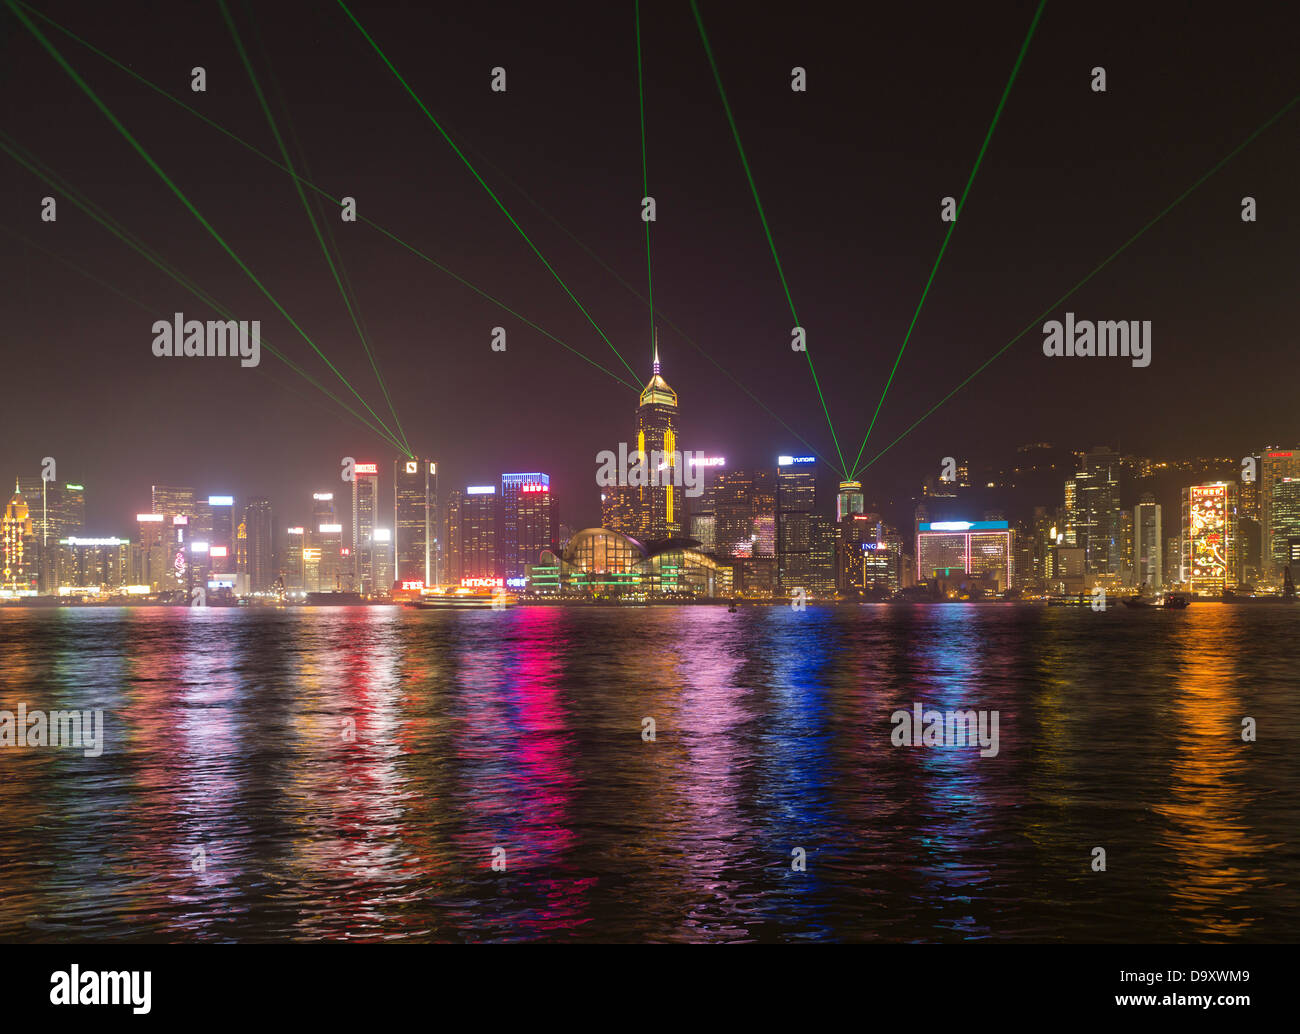 dh Symphony of Lights WANCHAI WATERFRONT HONG KONG HARBOUR Laser Show skyscrapers at night light wan chai Stock Photo